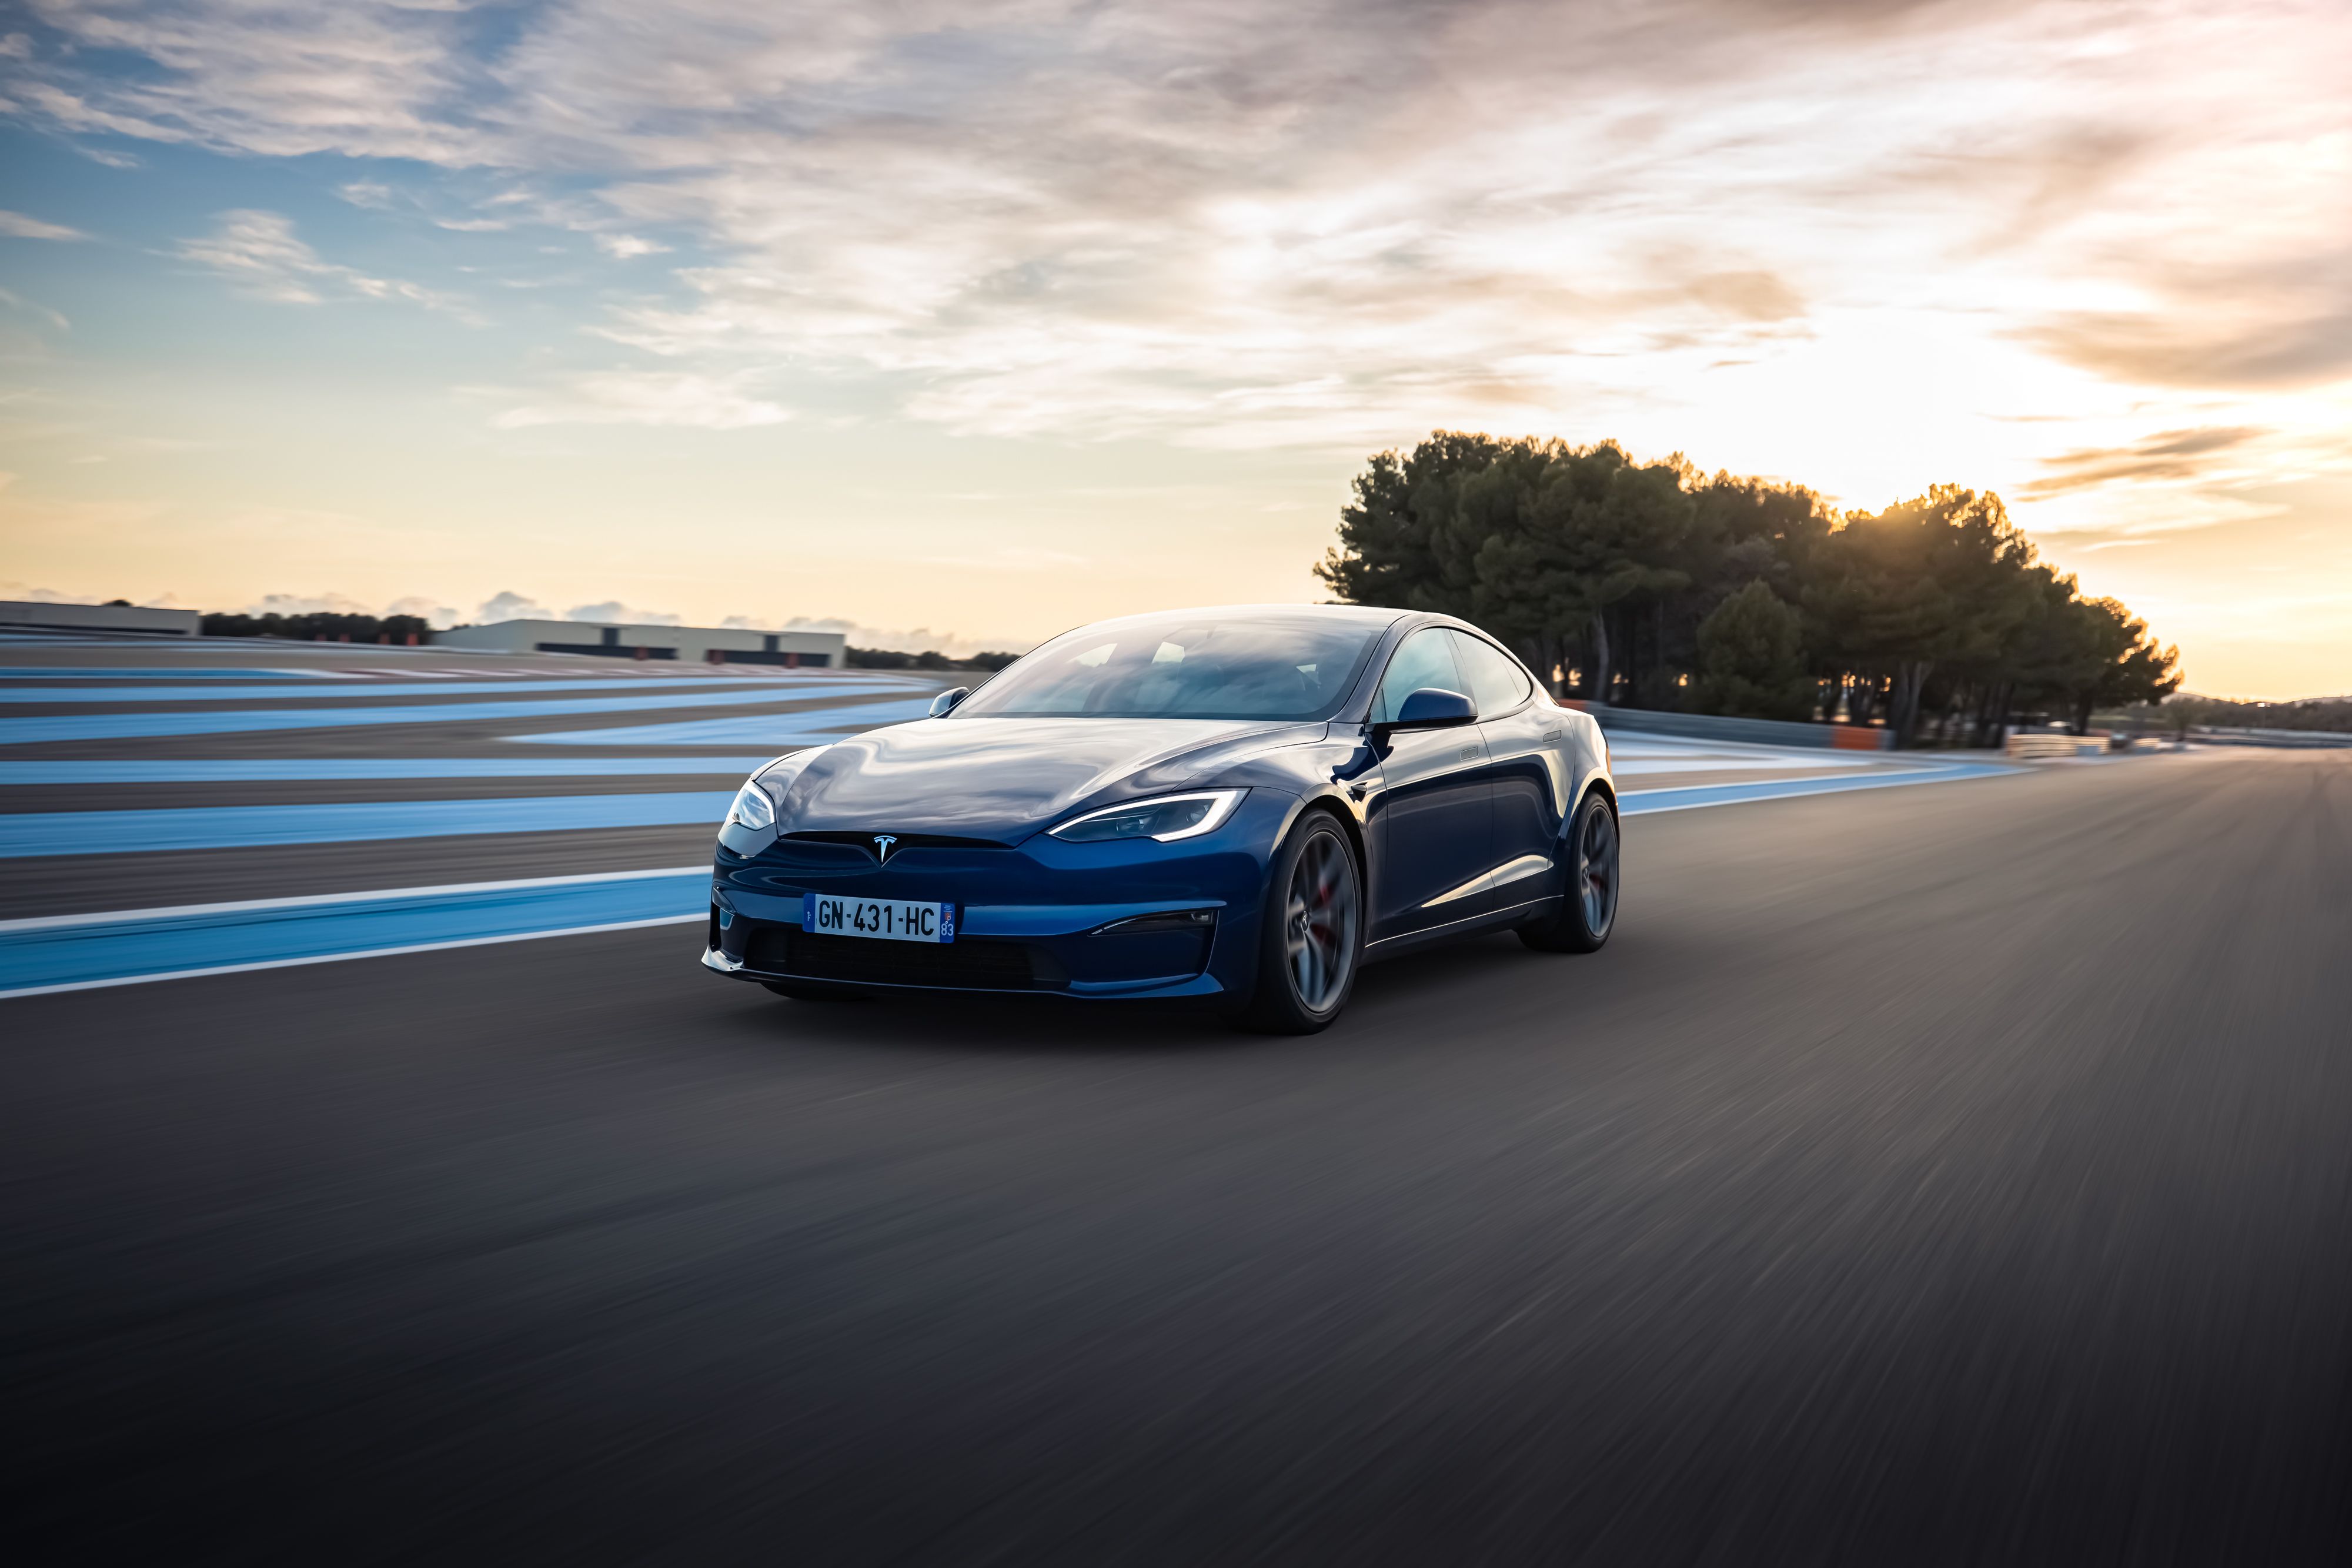 Tesla Model S Features and Specs